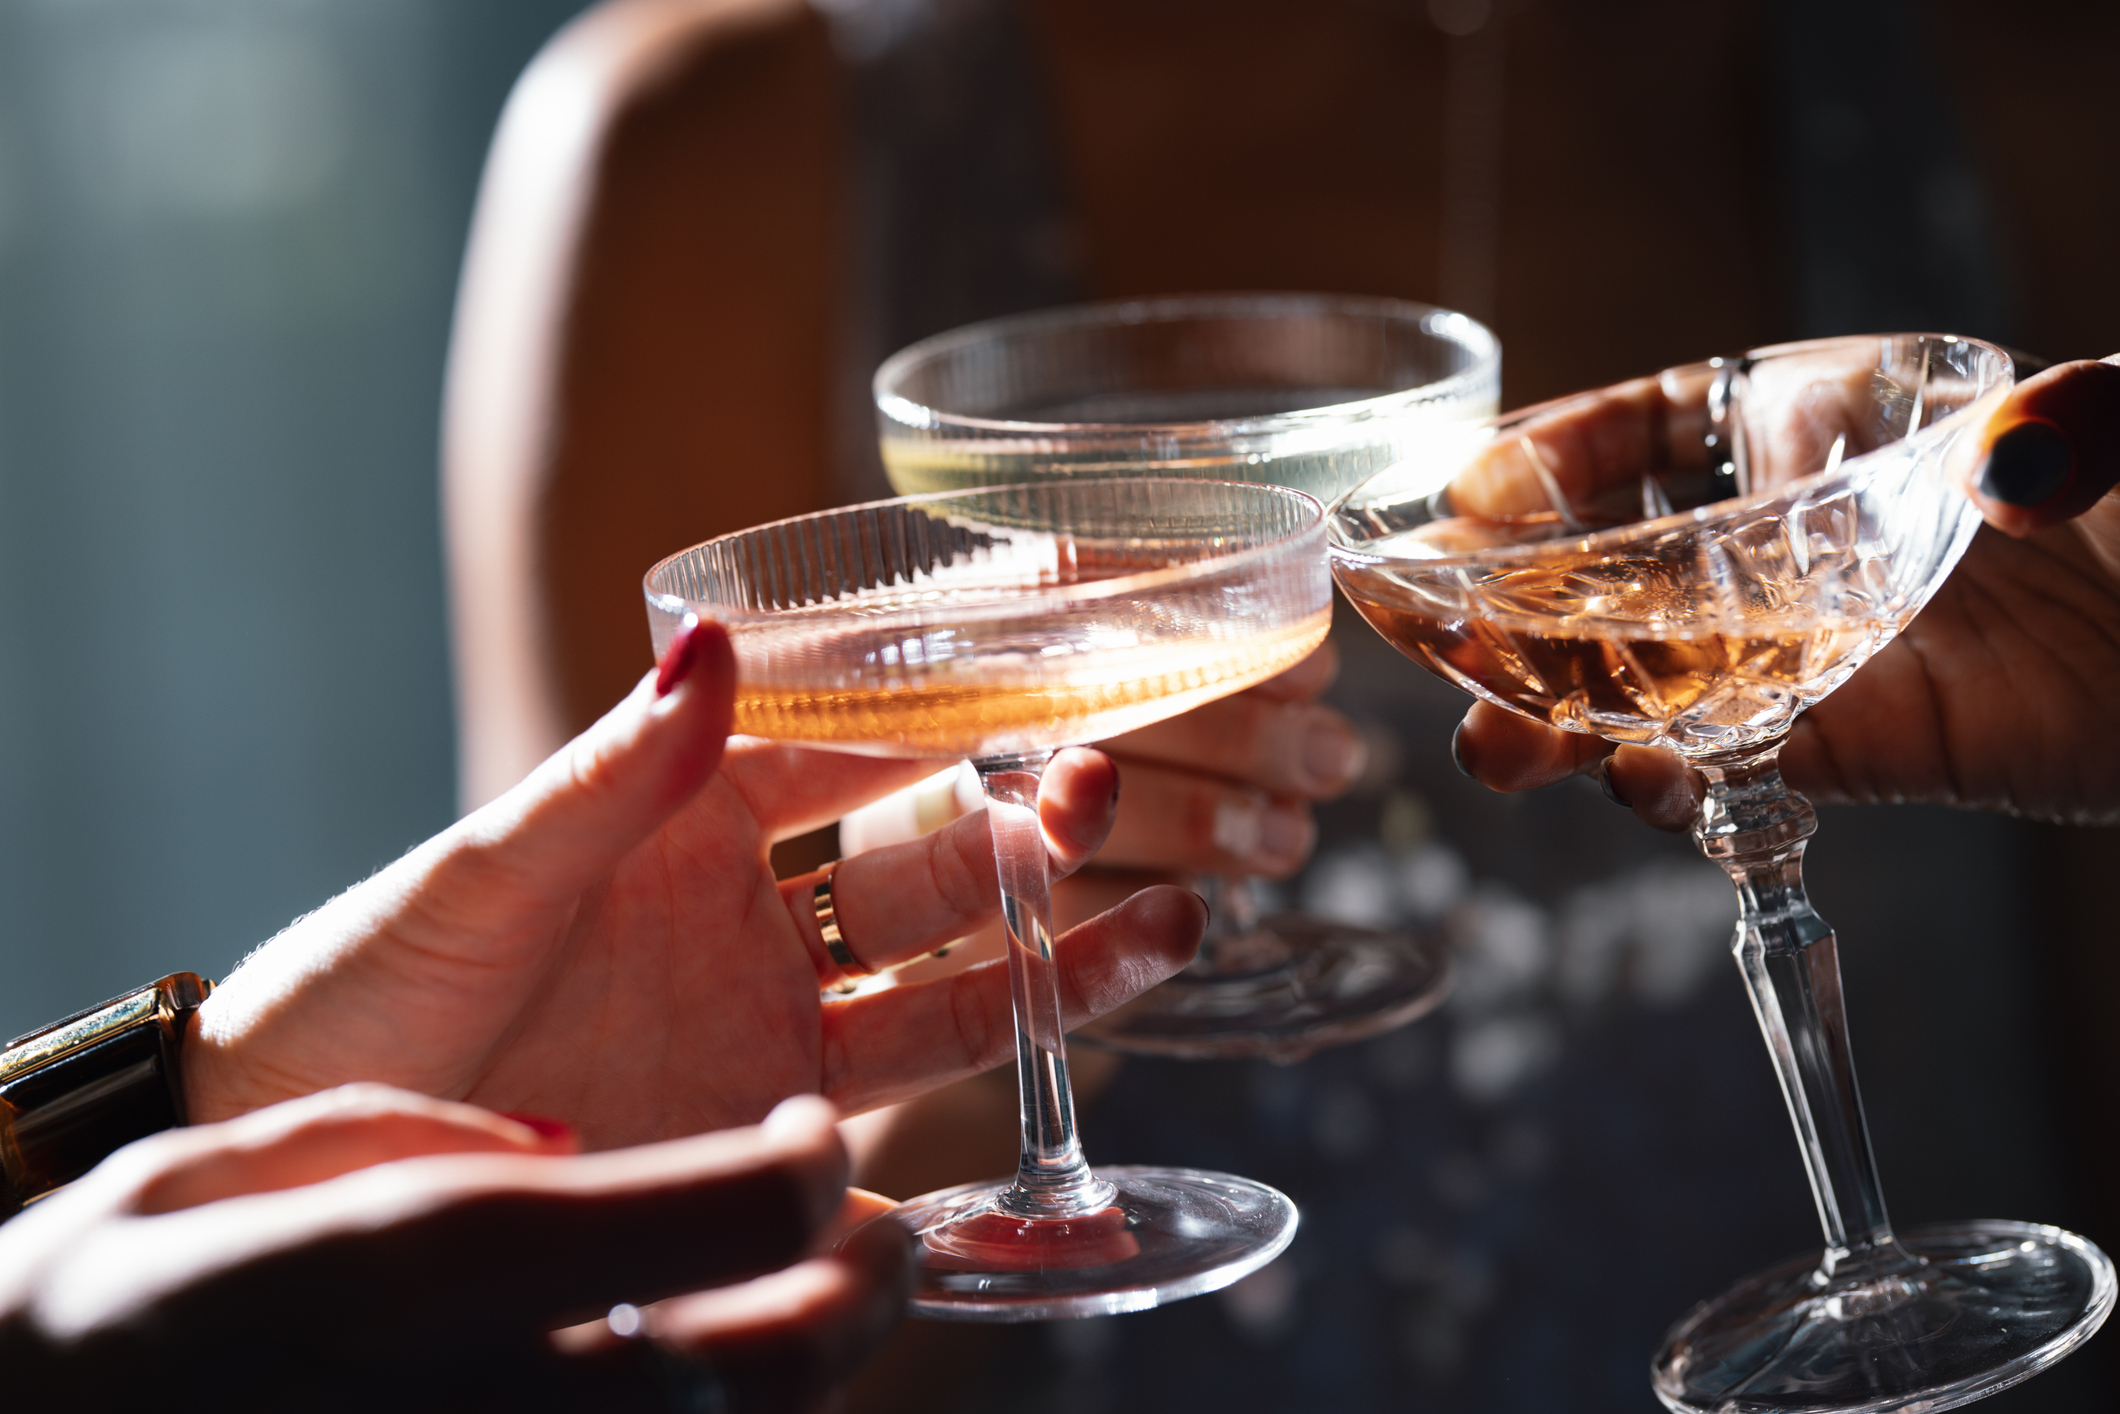 more than one alcoholic drink a day raises heart disease risk for women